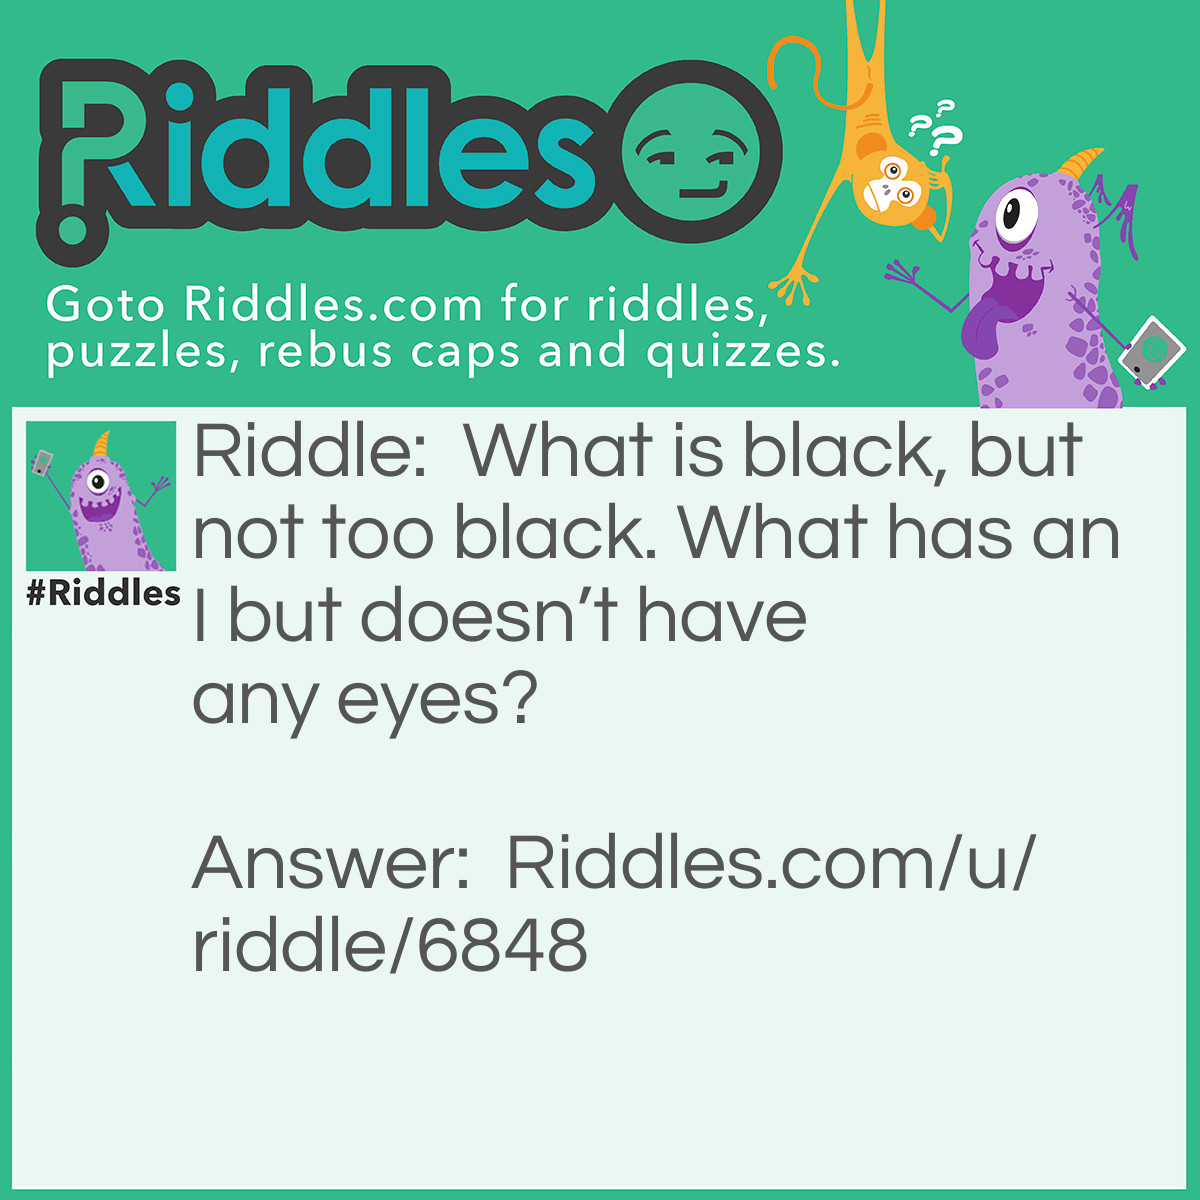 Riddle: What is black, but not too black. What has an I but doesn't have any eyes? Answer: Ink.